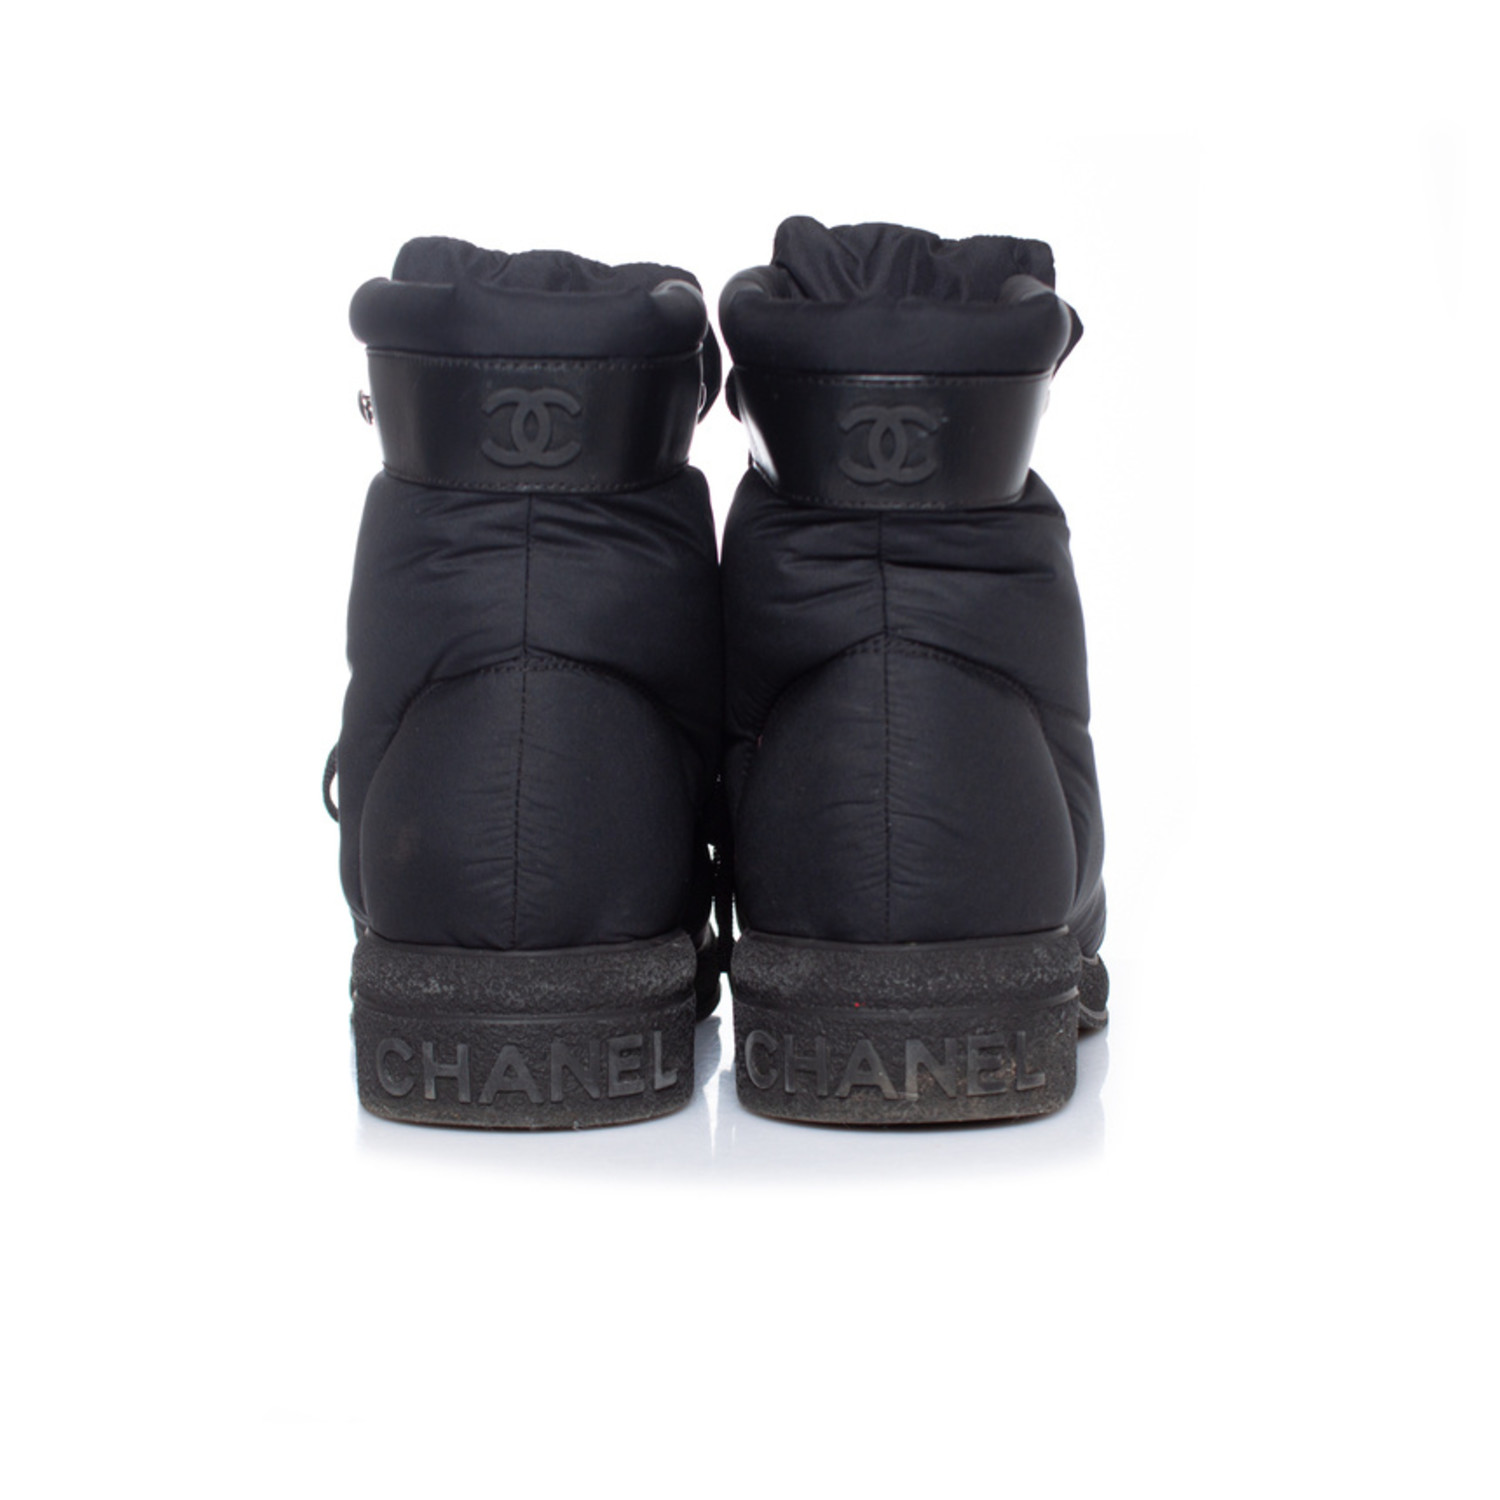 Snow boots Chanel Black size 38.5 EU in Suede - 20223654